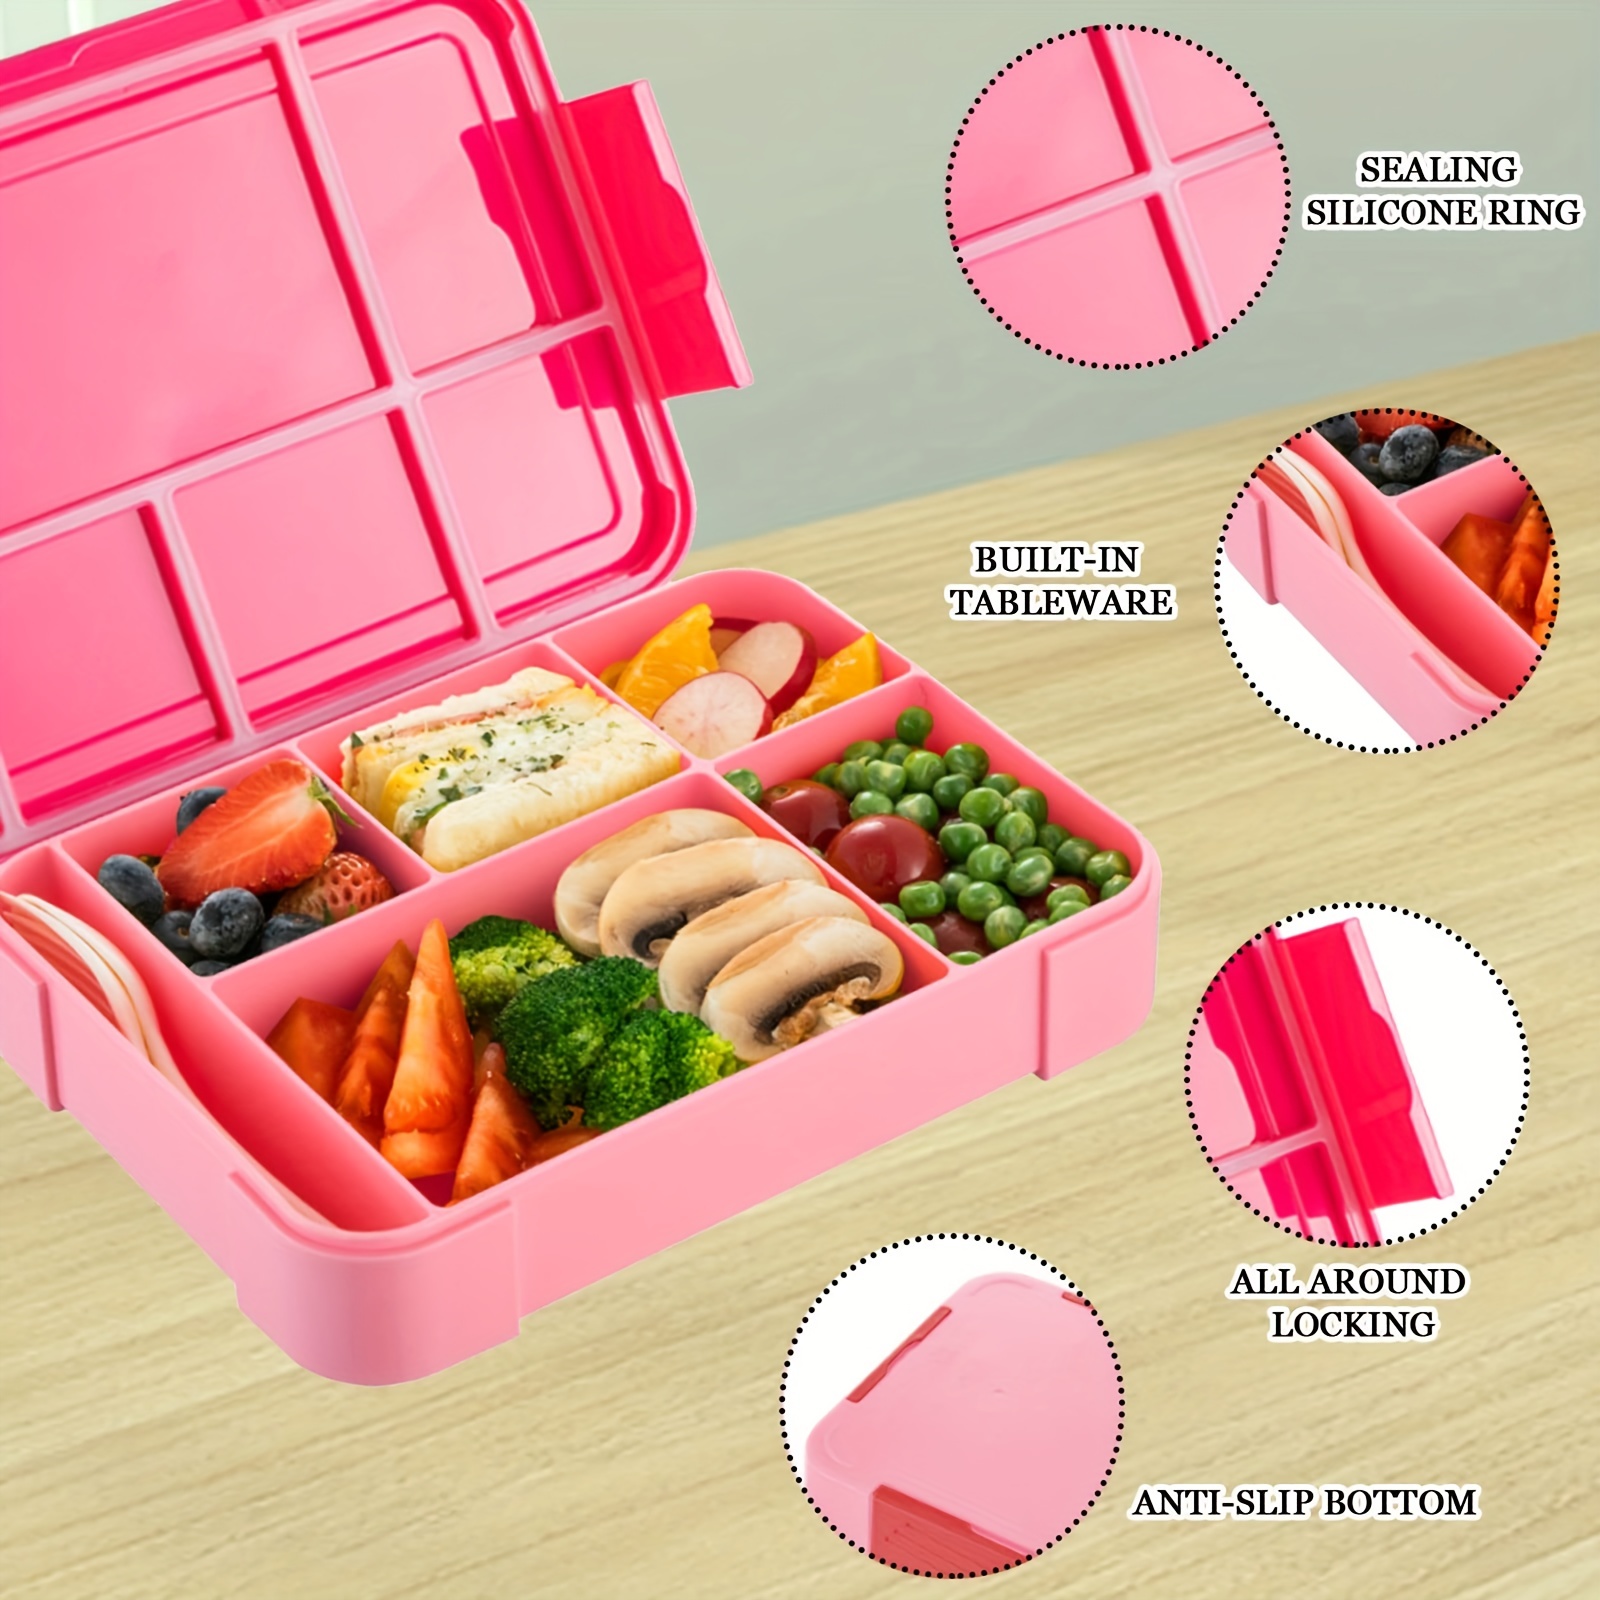 1set 800ml Three Grids Plastic Lunch Box With Bag And Utensils